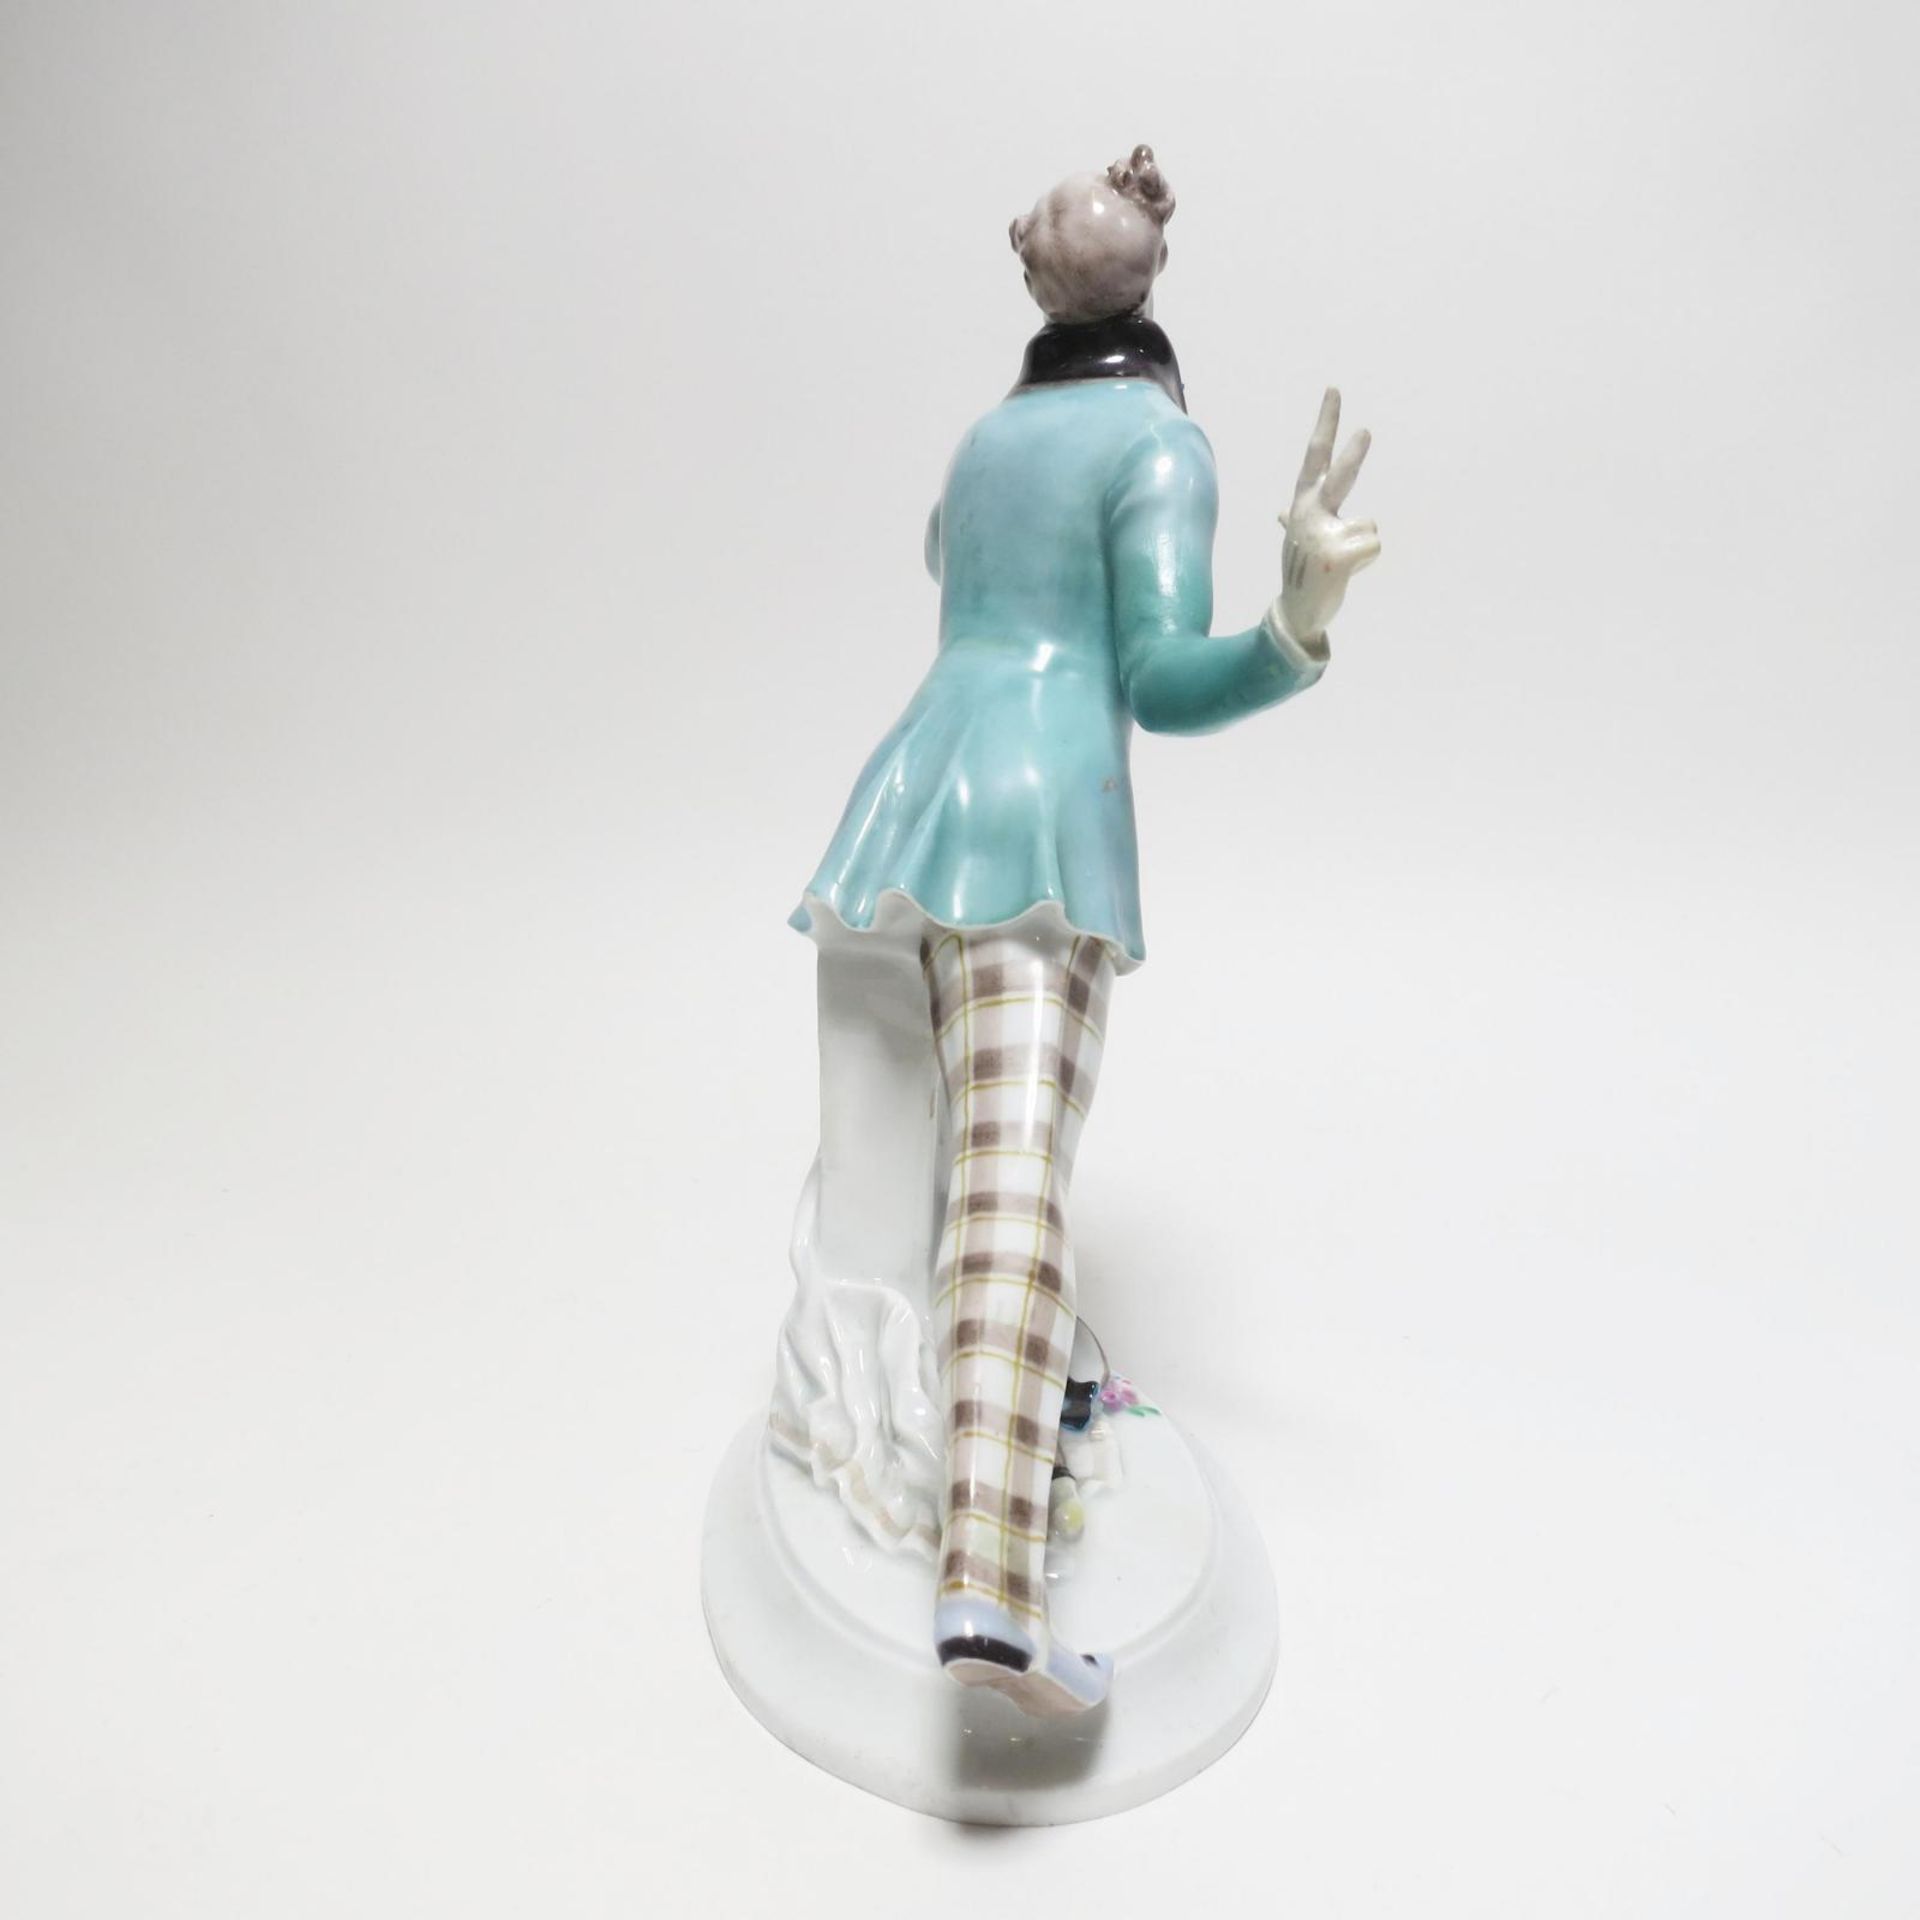 Meissen: PORCELAIN FIGURINES OF THE 'RUSSIAN BALLET' - Image 48 of 49